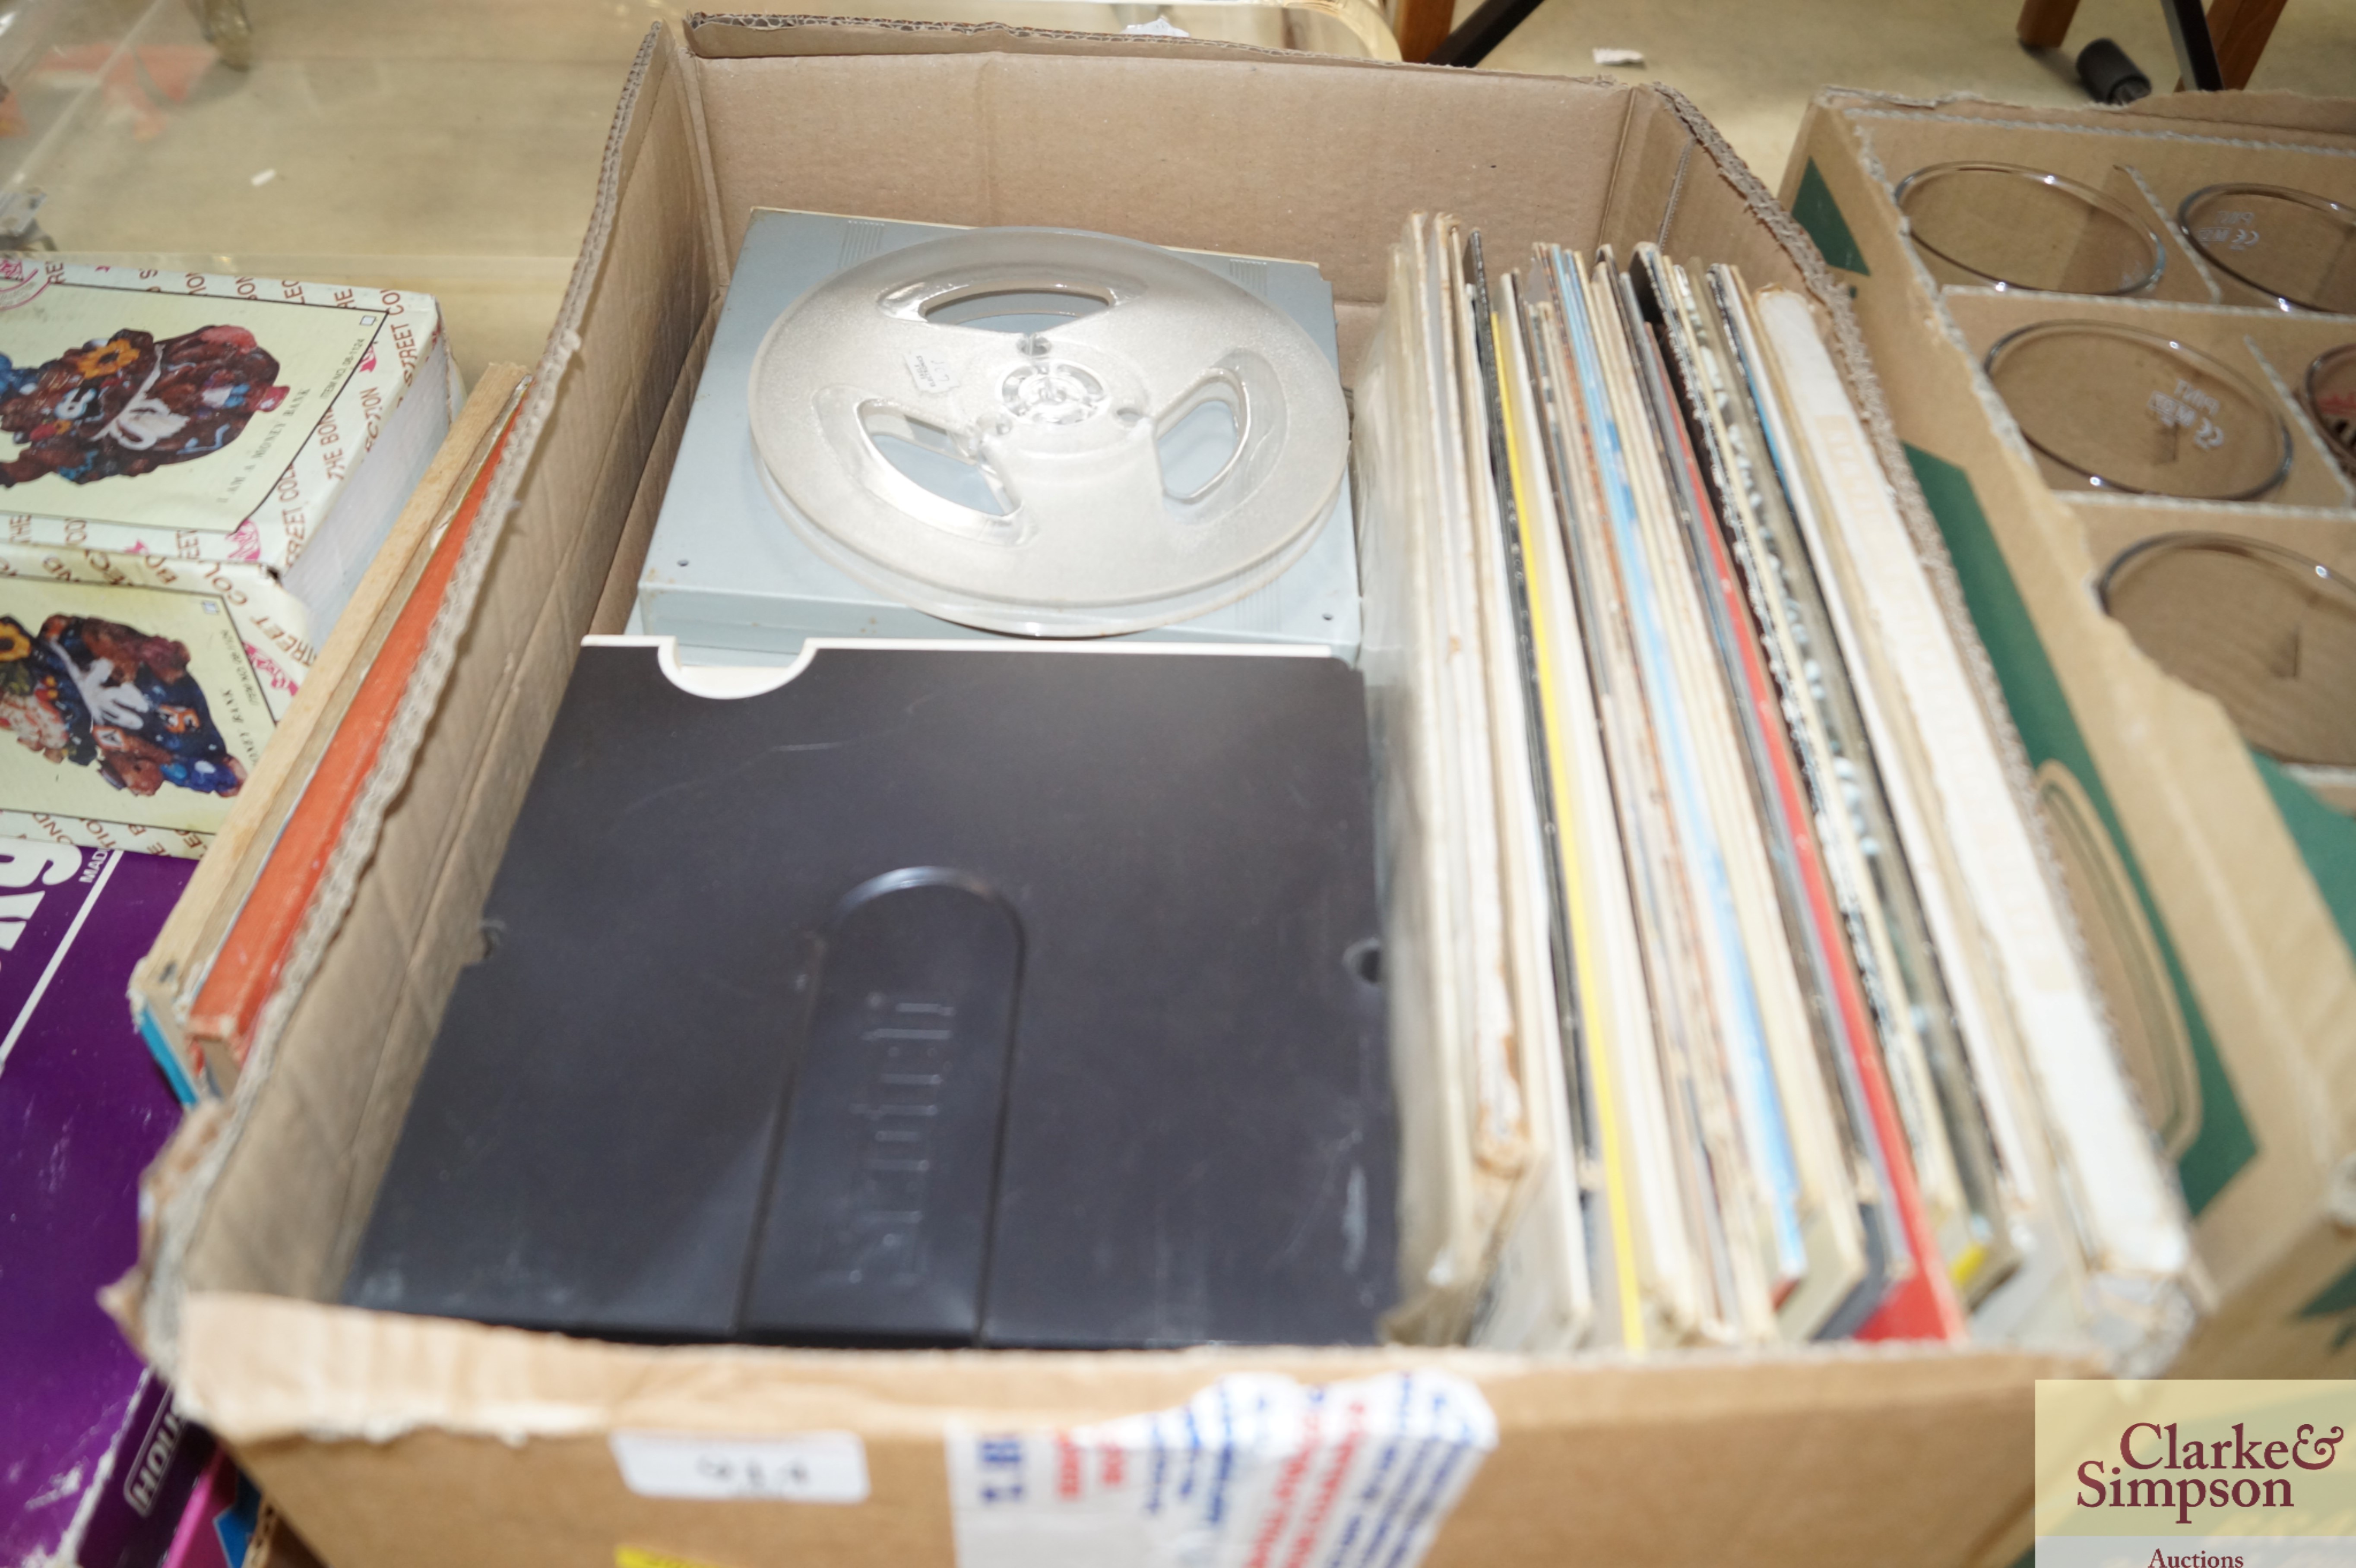 A box containing various LP's and reel to reel tap